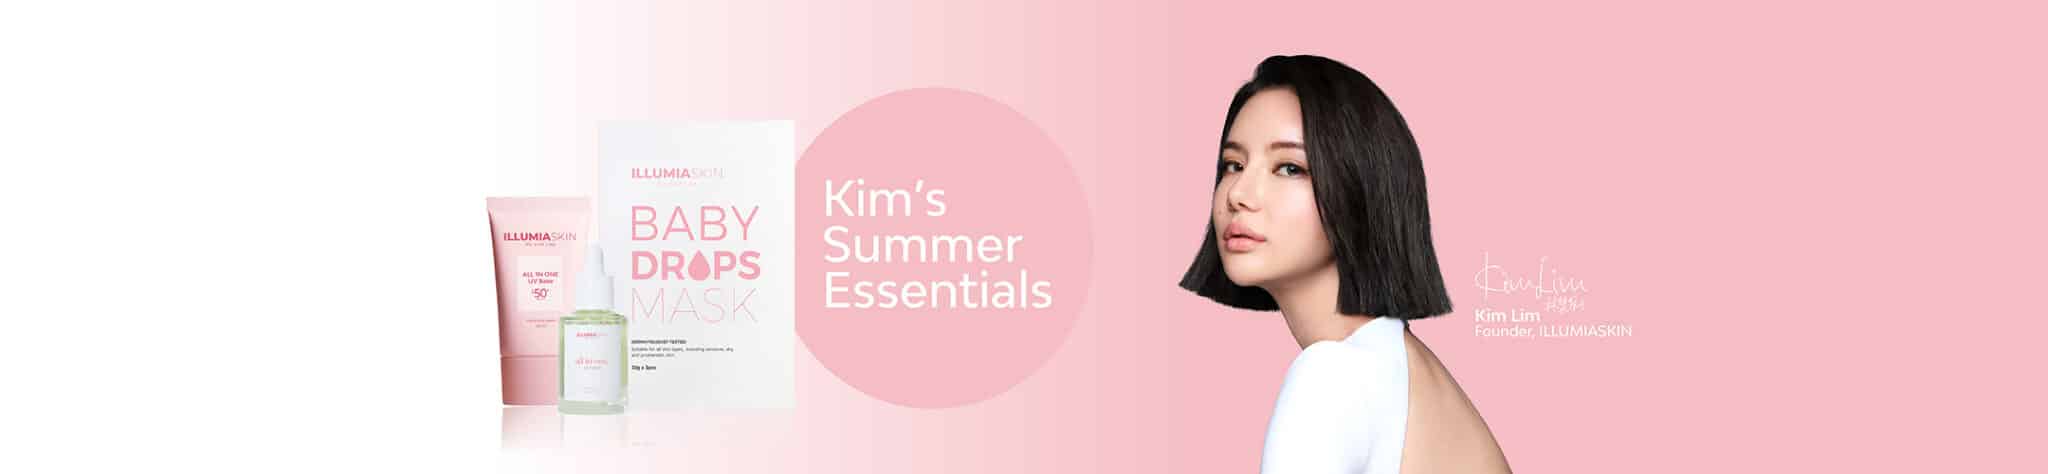 IS Homepage Banner_Kim